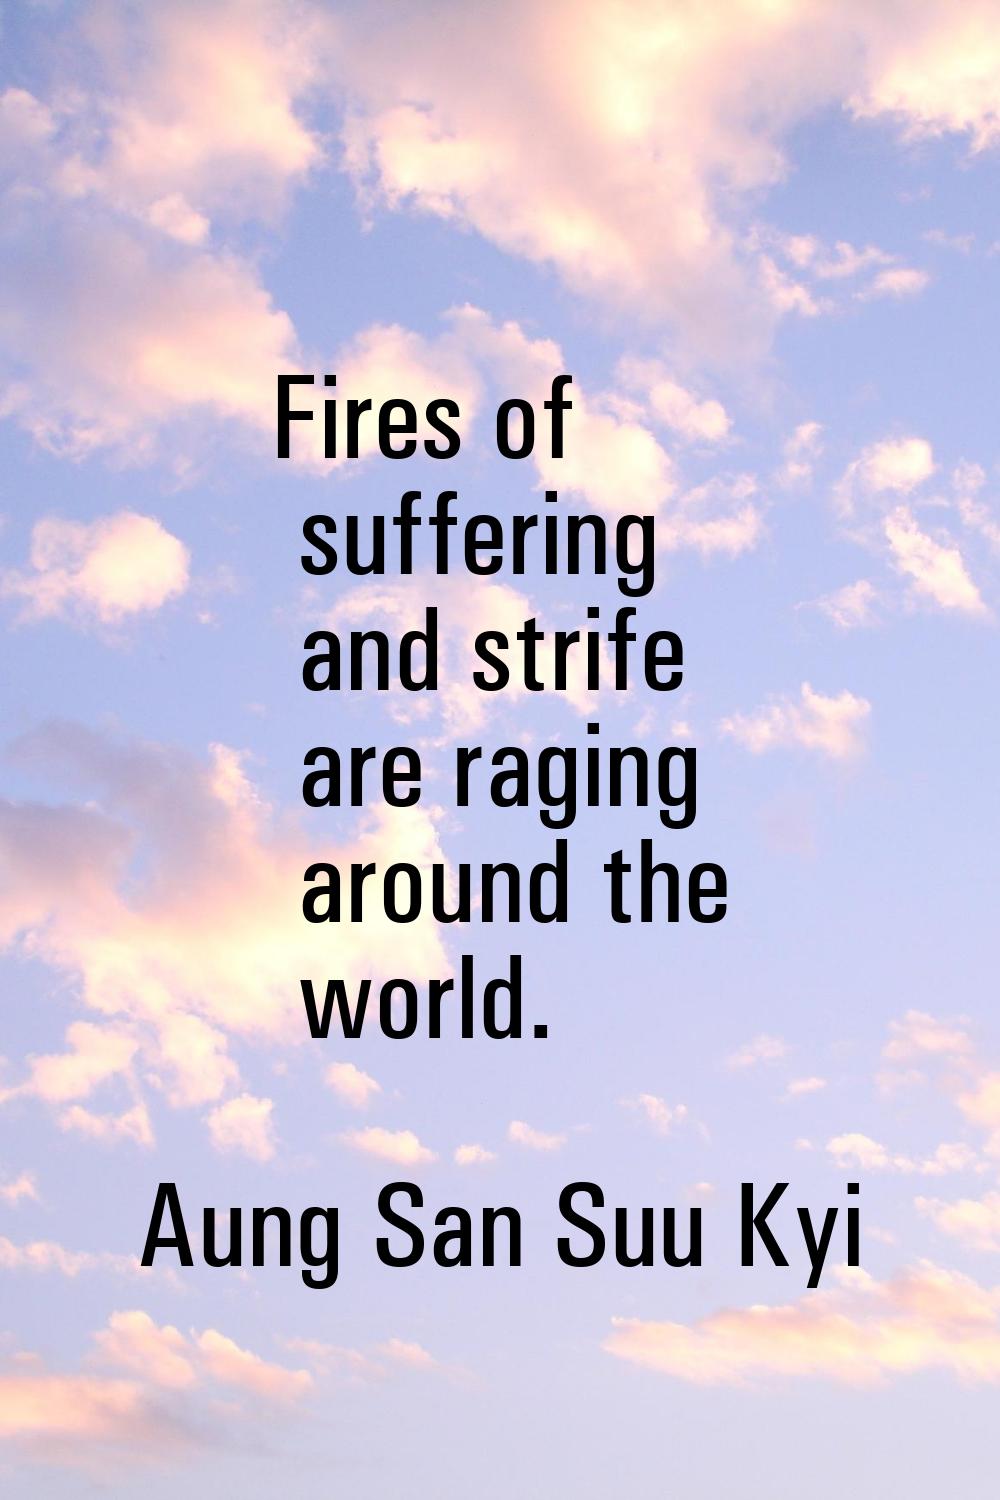 Fires of suffering and strife are raging around the world.